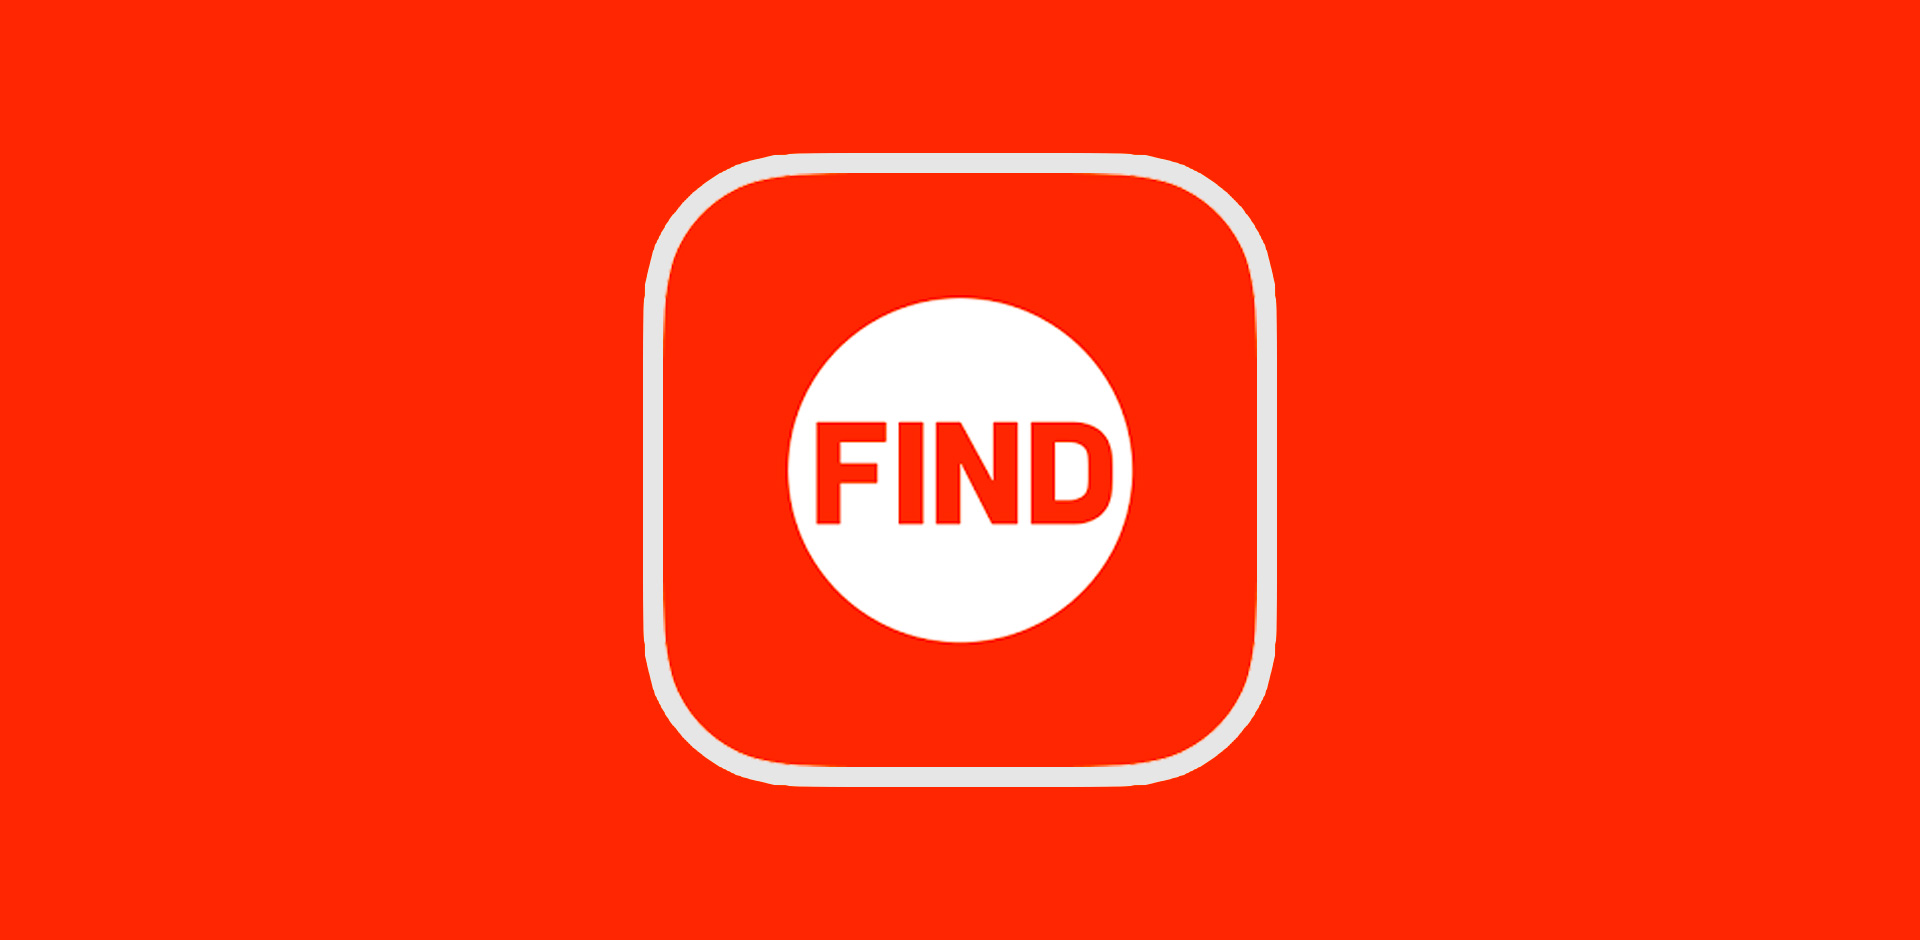 the find